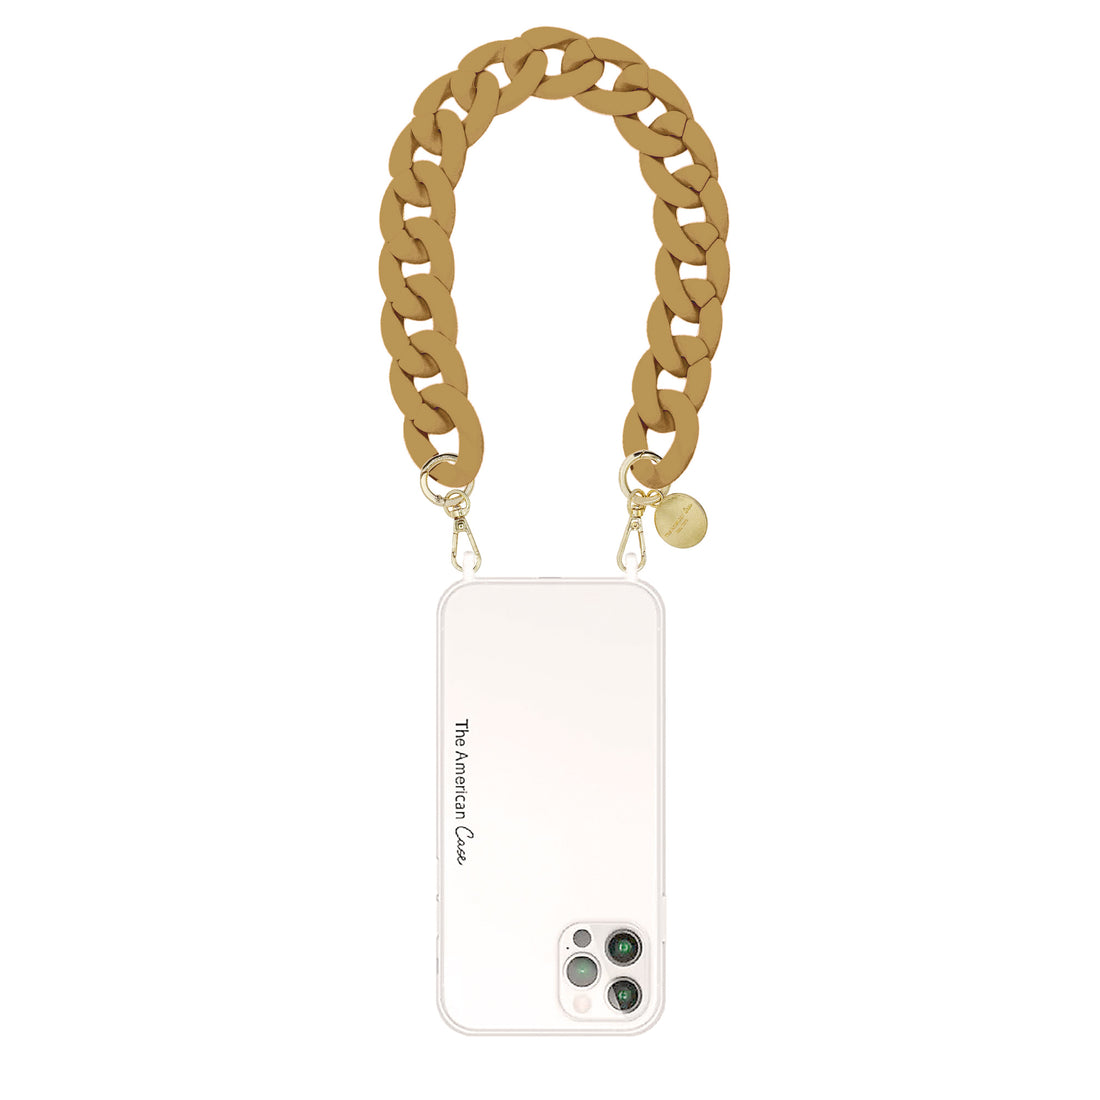 Quinn -  Matte Resin Short Chain with Gold Carabiners